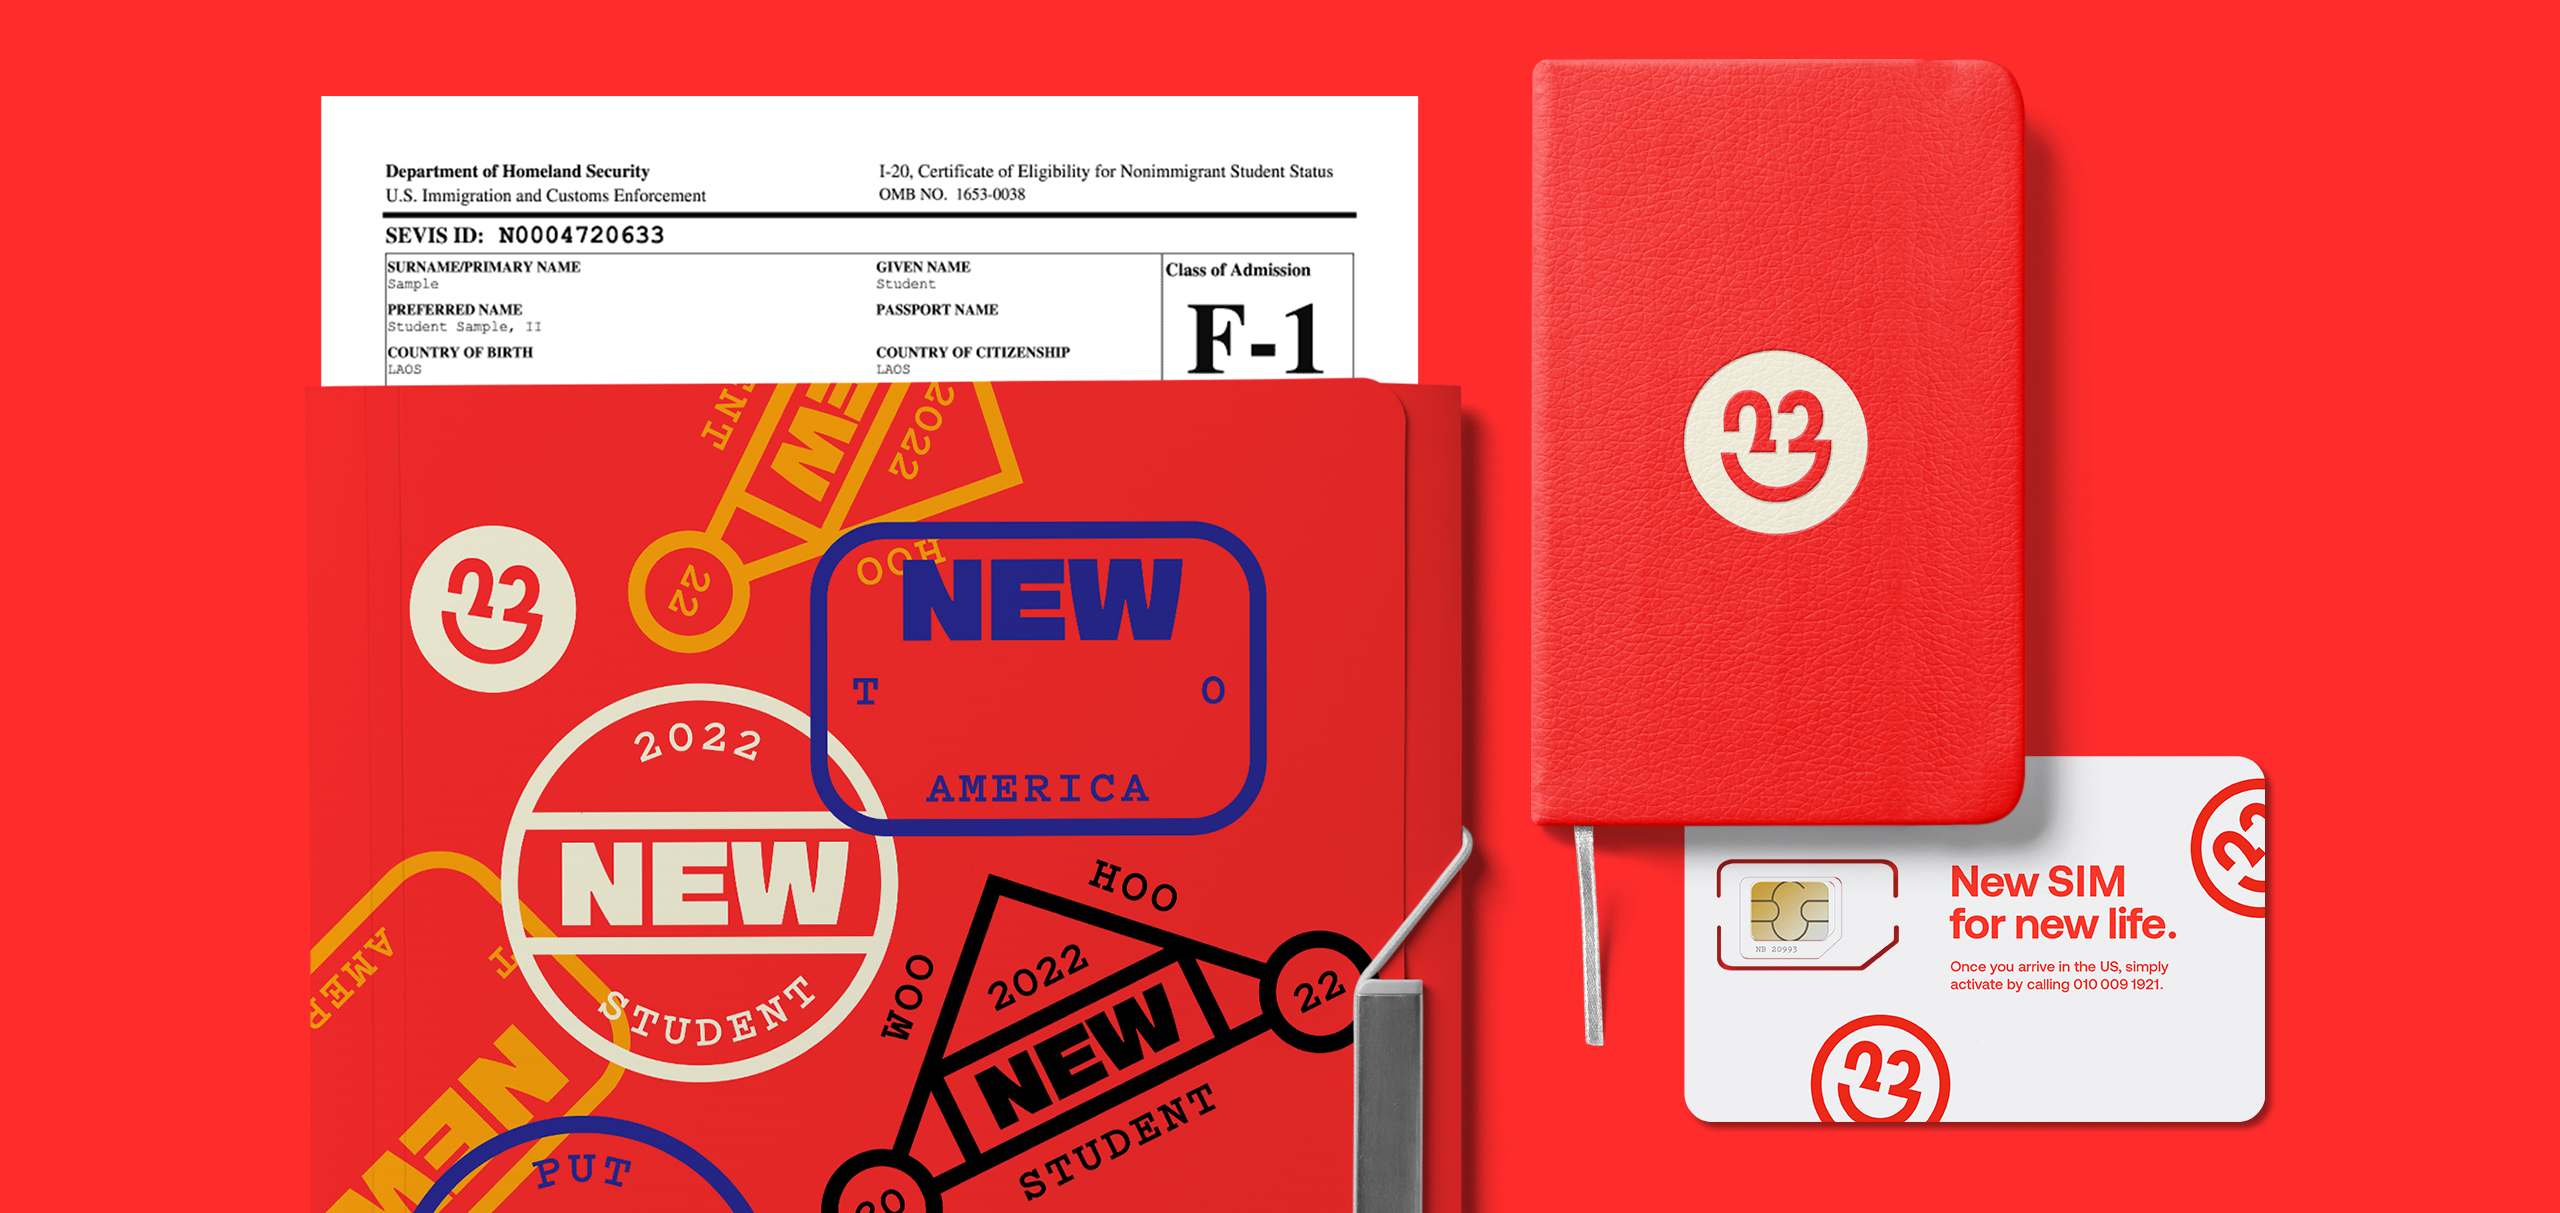 A folder, notebook and sim card with Newbie branding on red background